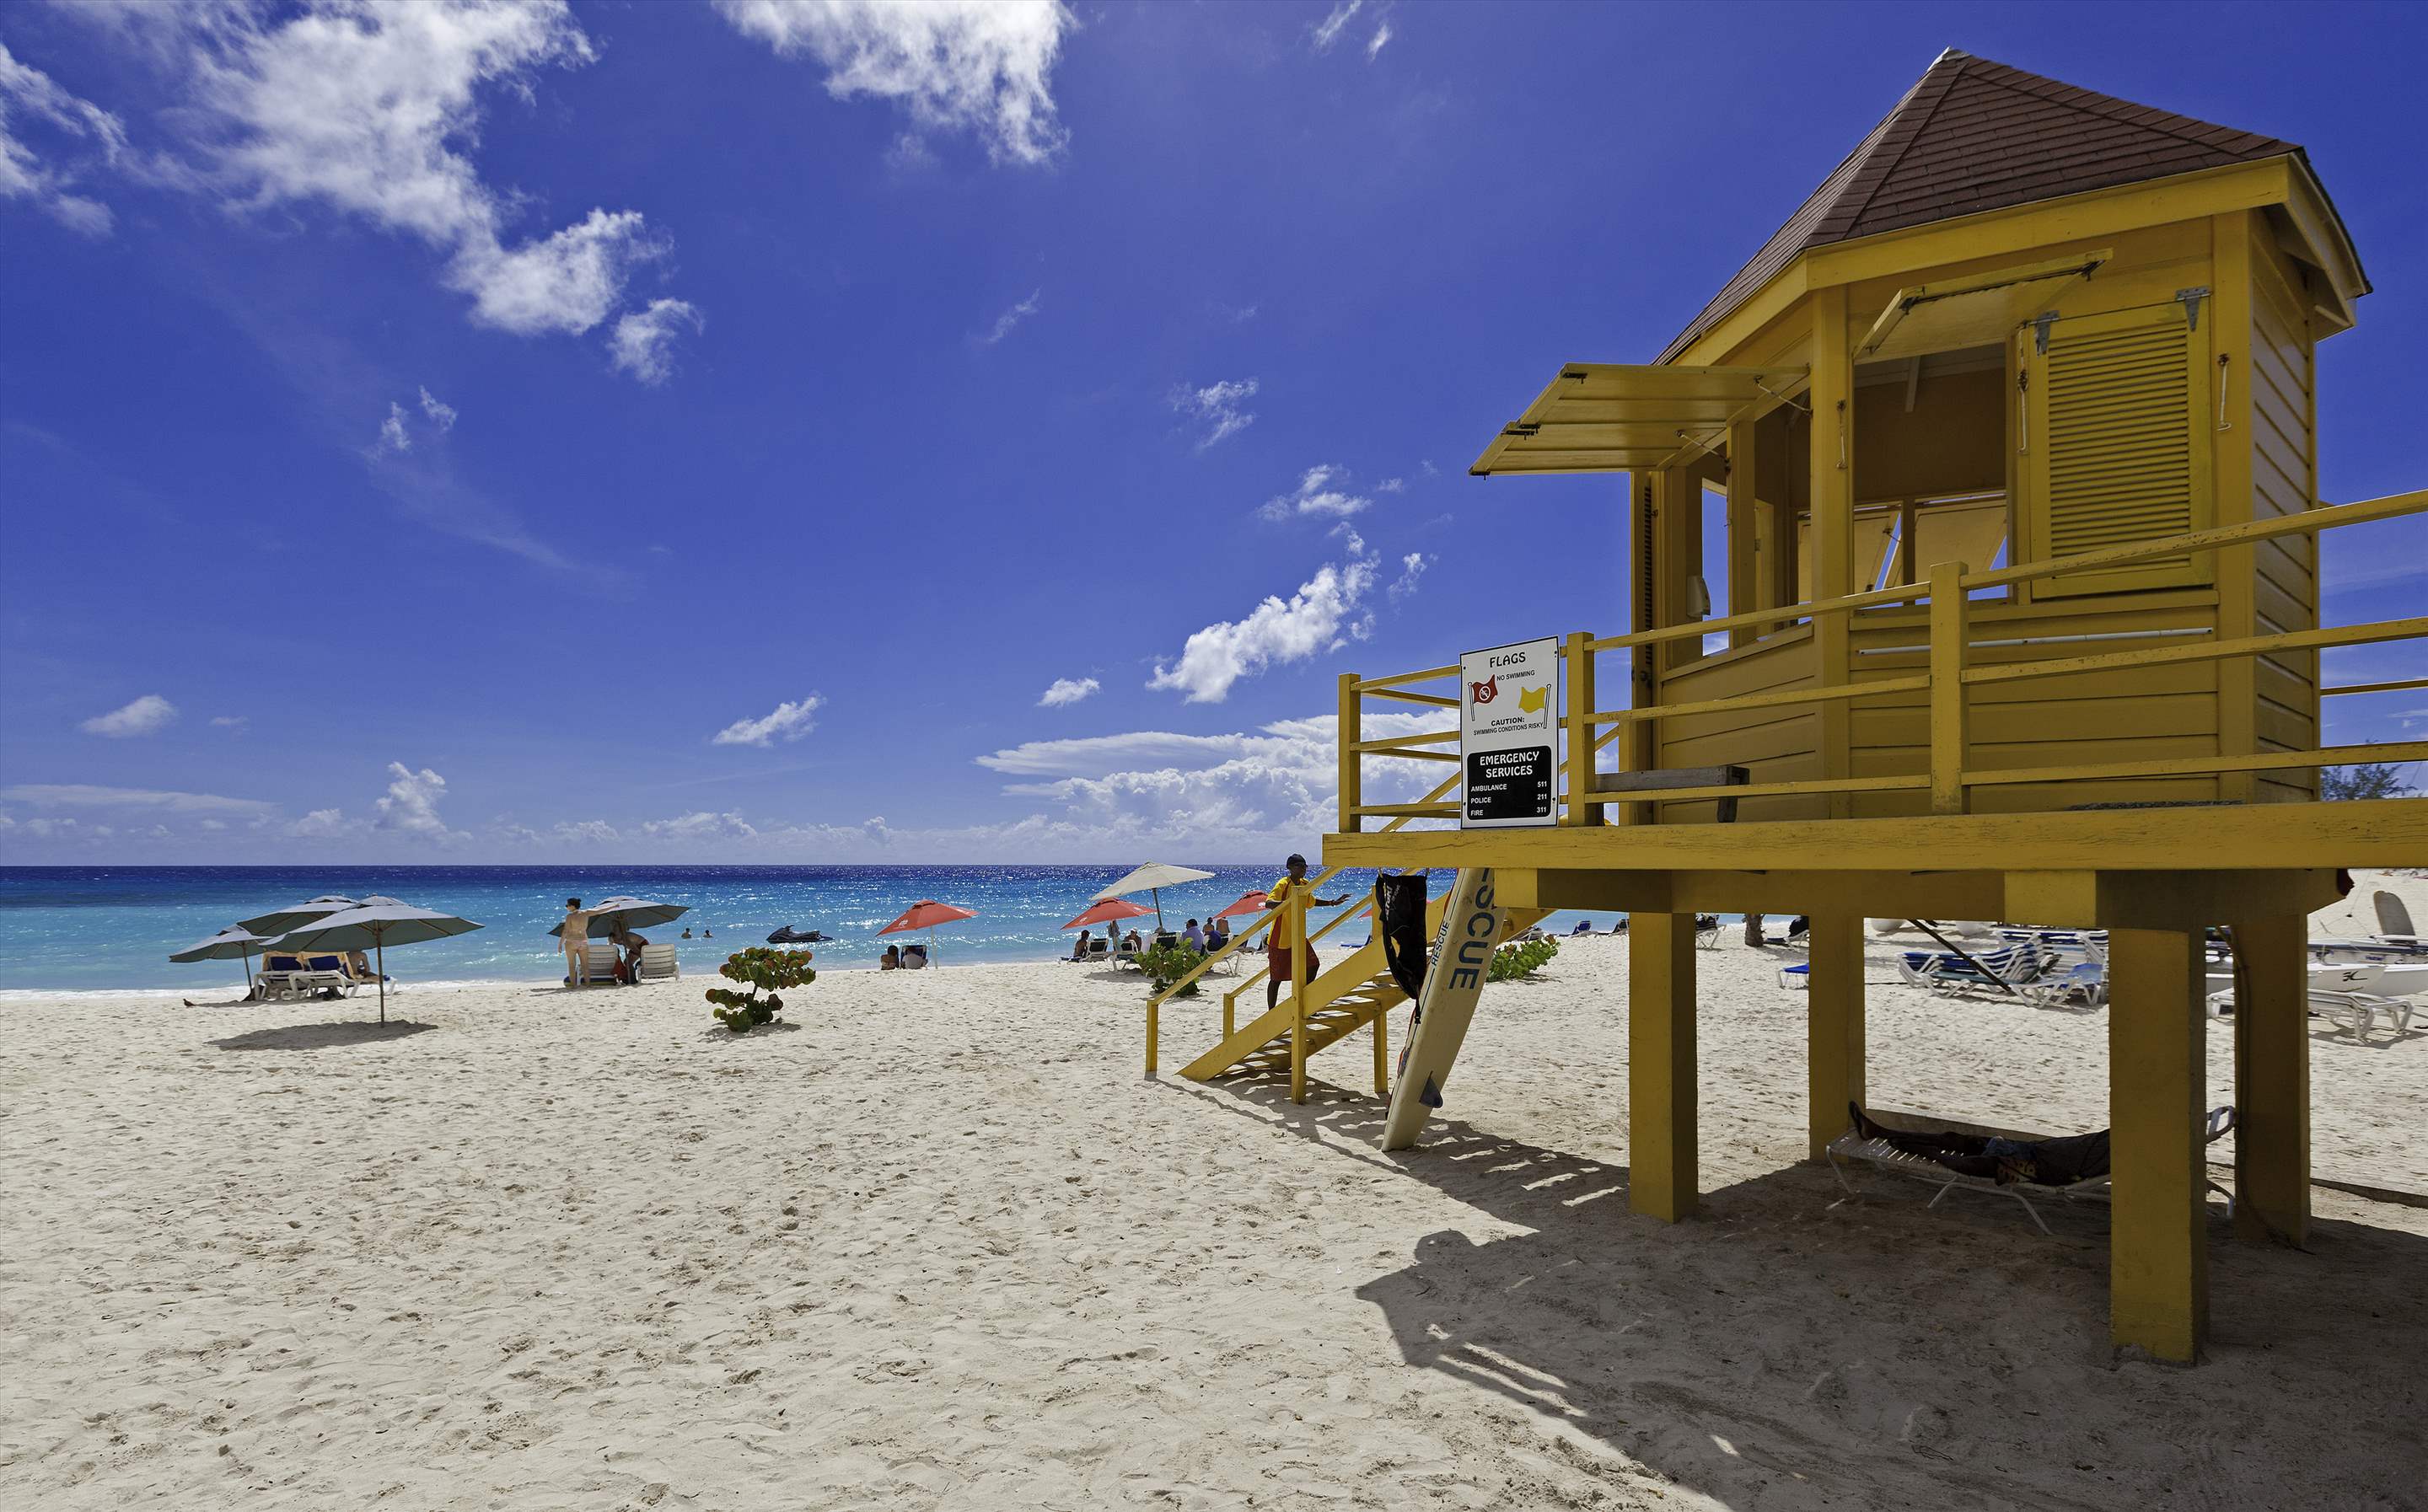 Sapphire Beach 509, 2 bedroom, 3 bedroom apartment in St. Lawrence Gap & South Coast, Barbados Photo #14